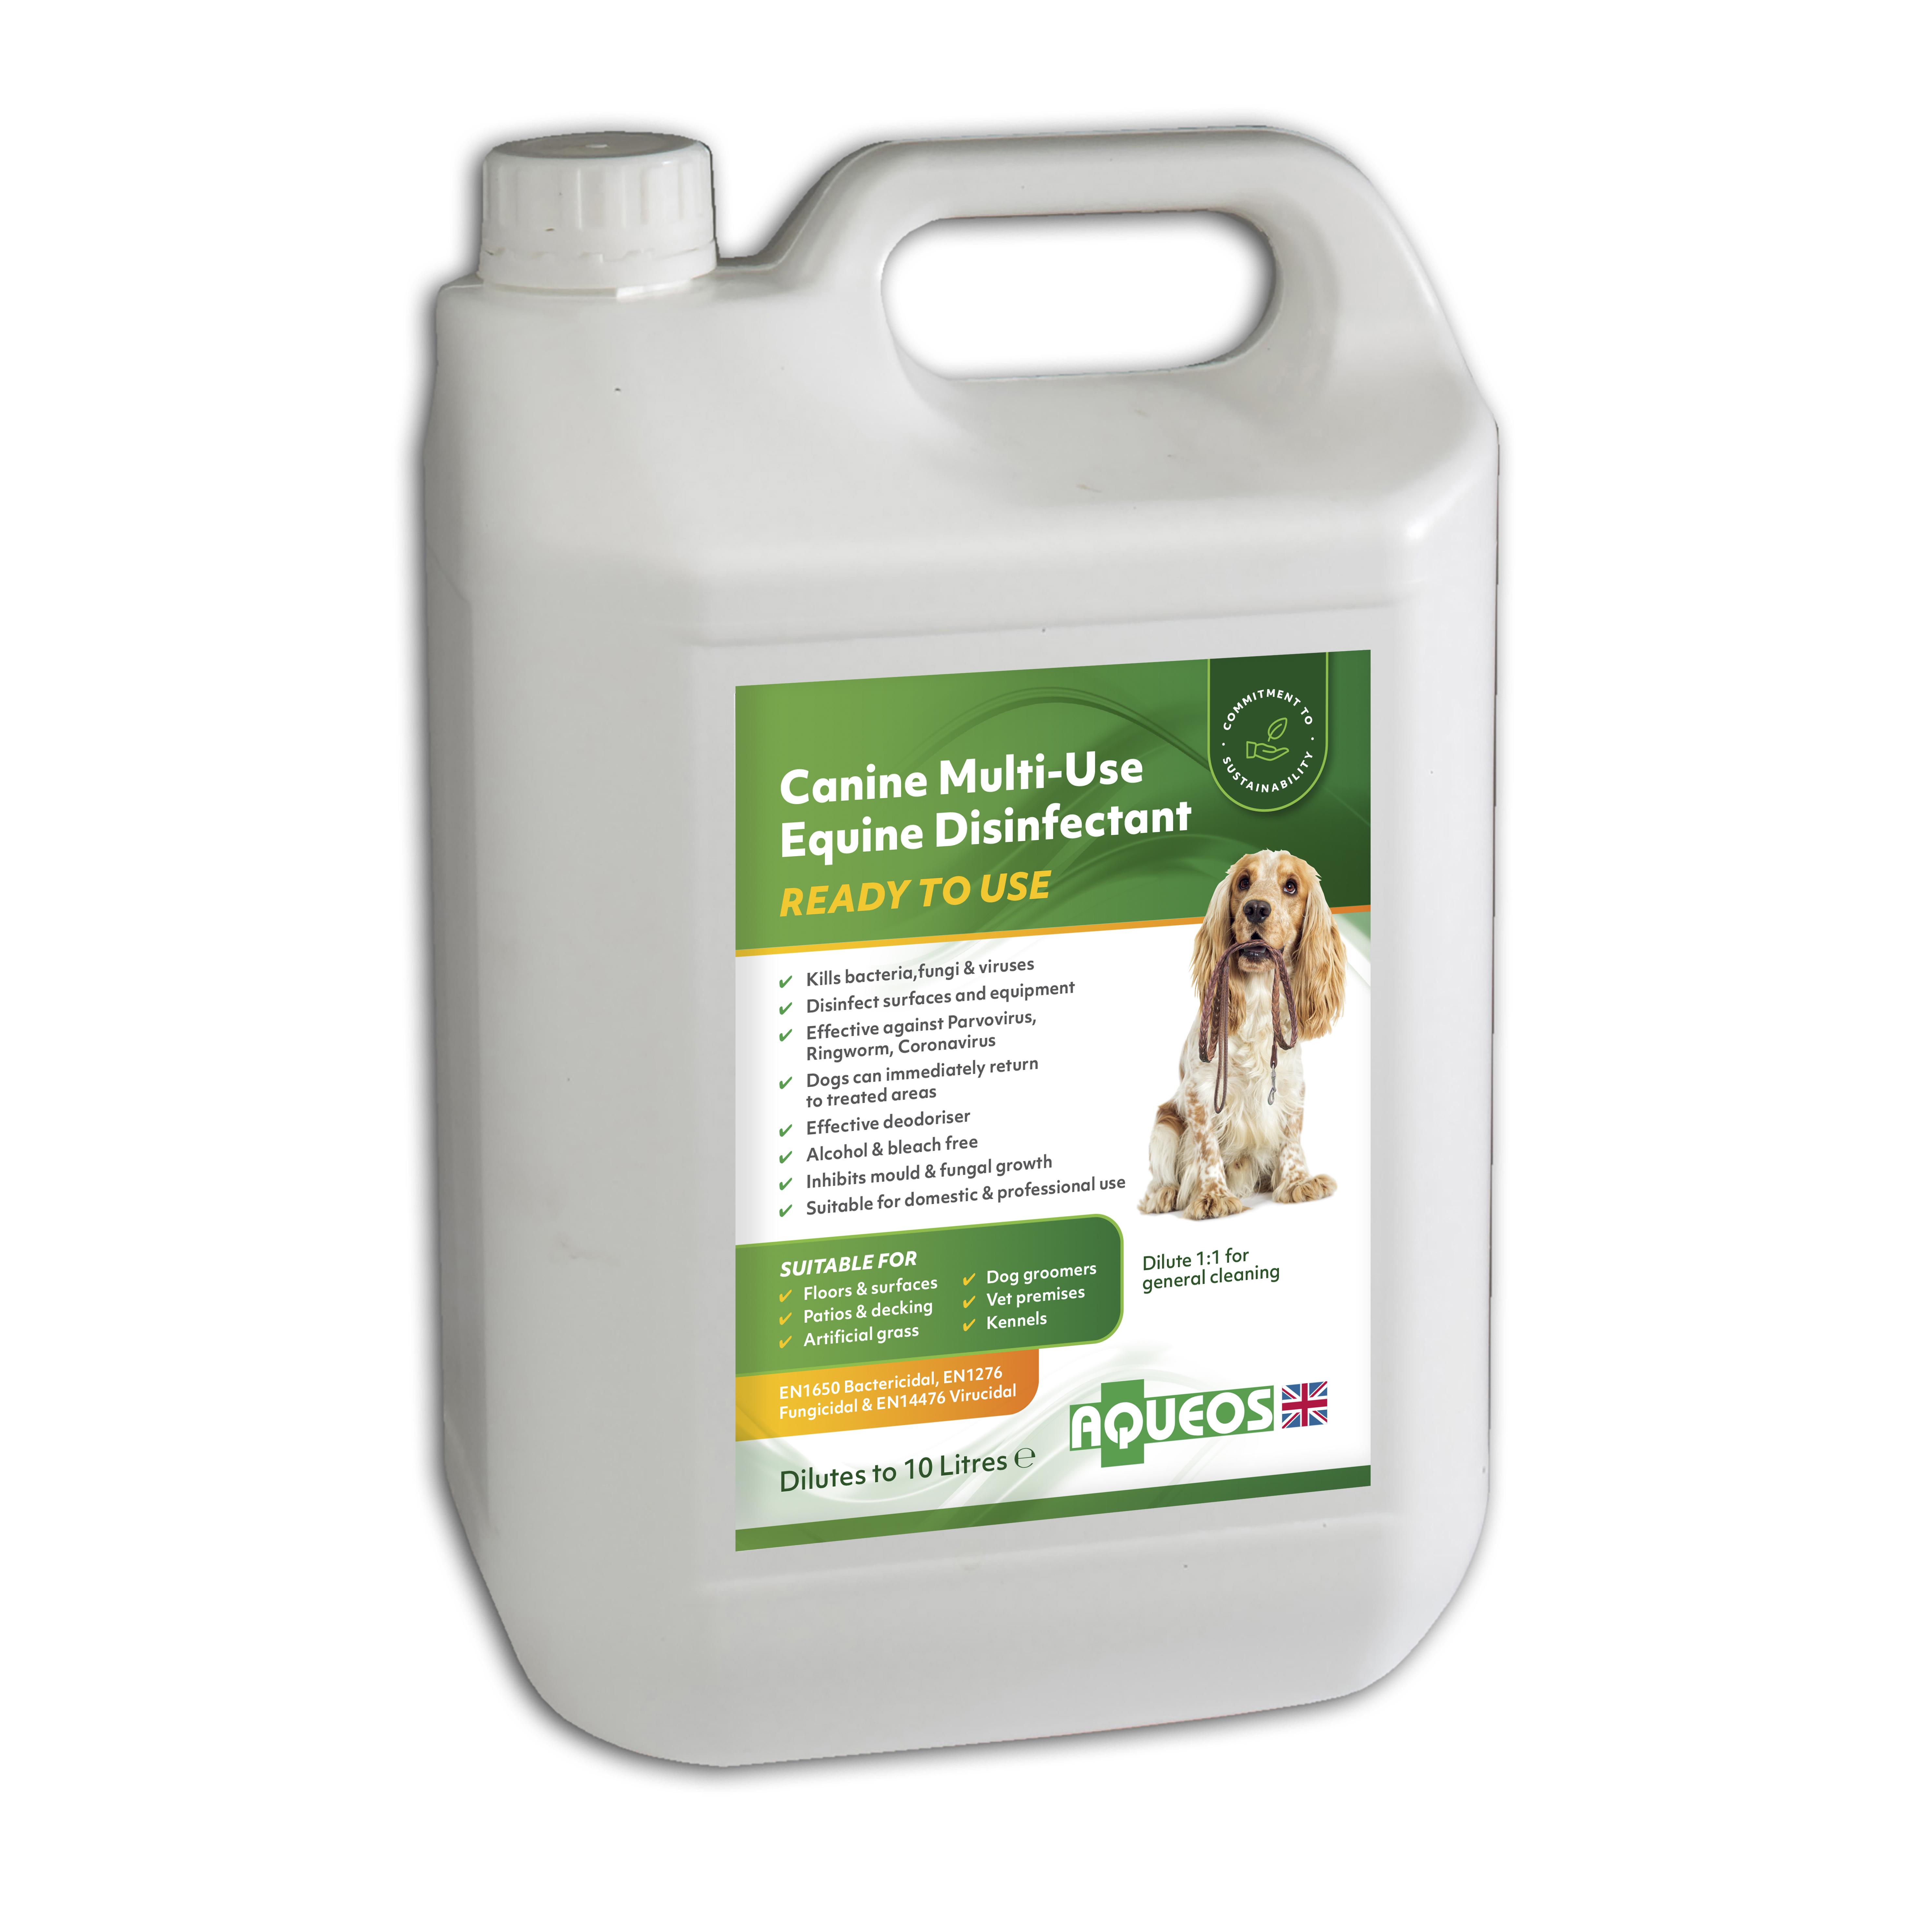 Canine disinfectant  for surfaces